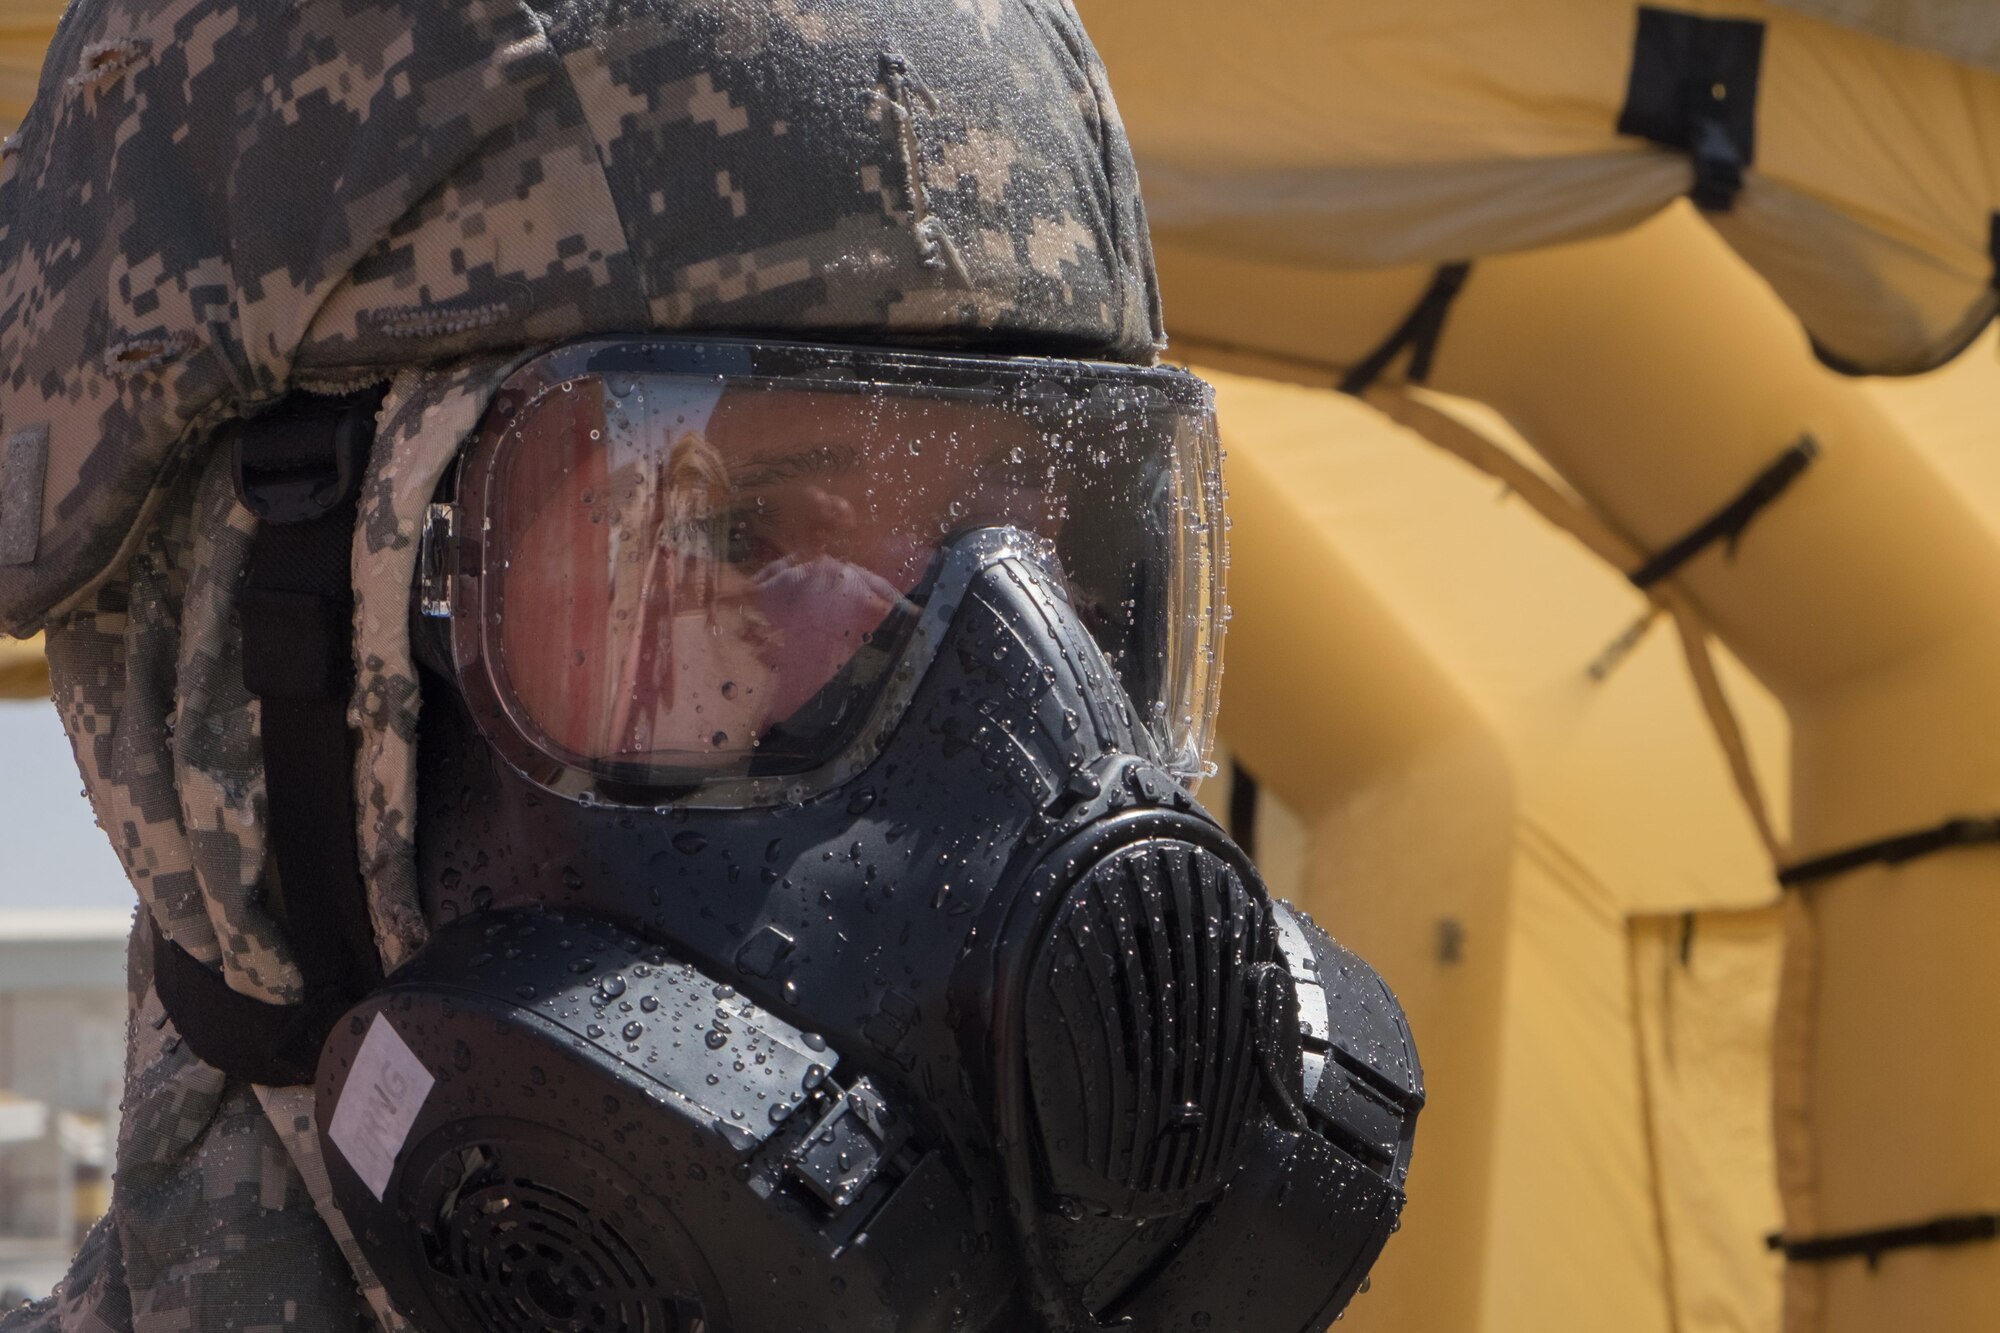 A Soldier with the 3rd Battalion, 4th Air Defense Artillery, undergoes Contamination Control Area training in a Lightweight Inflatable Decontamination System June 8, 2017, at an undisclosed location in southwest Asia. This training familiarized Airmen and Soldiers with CCA procedures during wartime operations. (U.S. Air Force photo by Senior Airman Preston Webb)